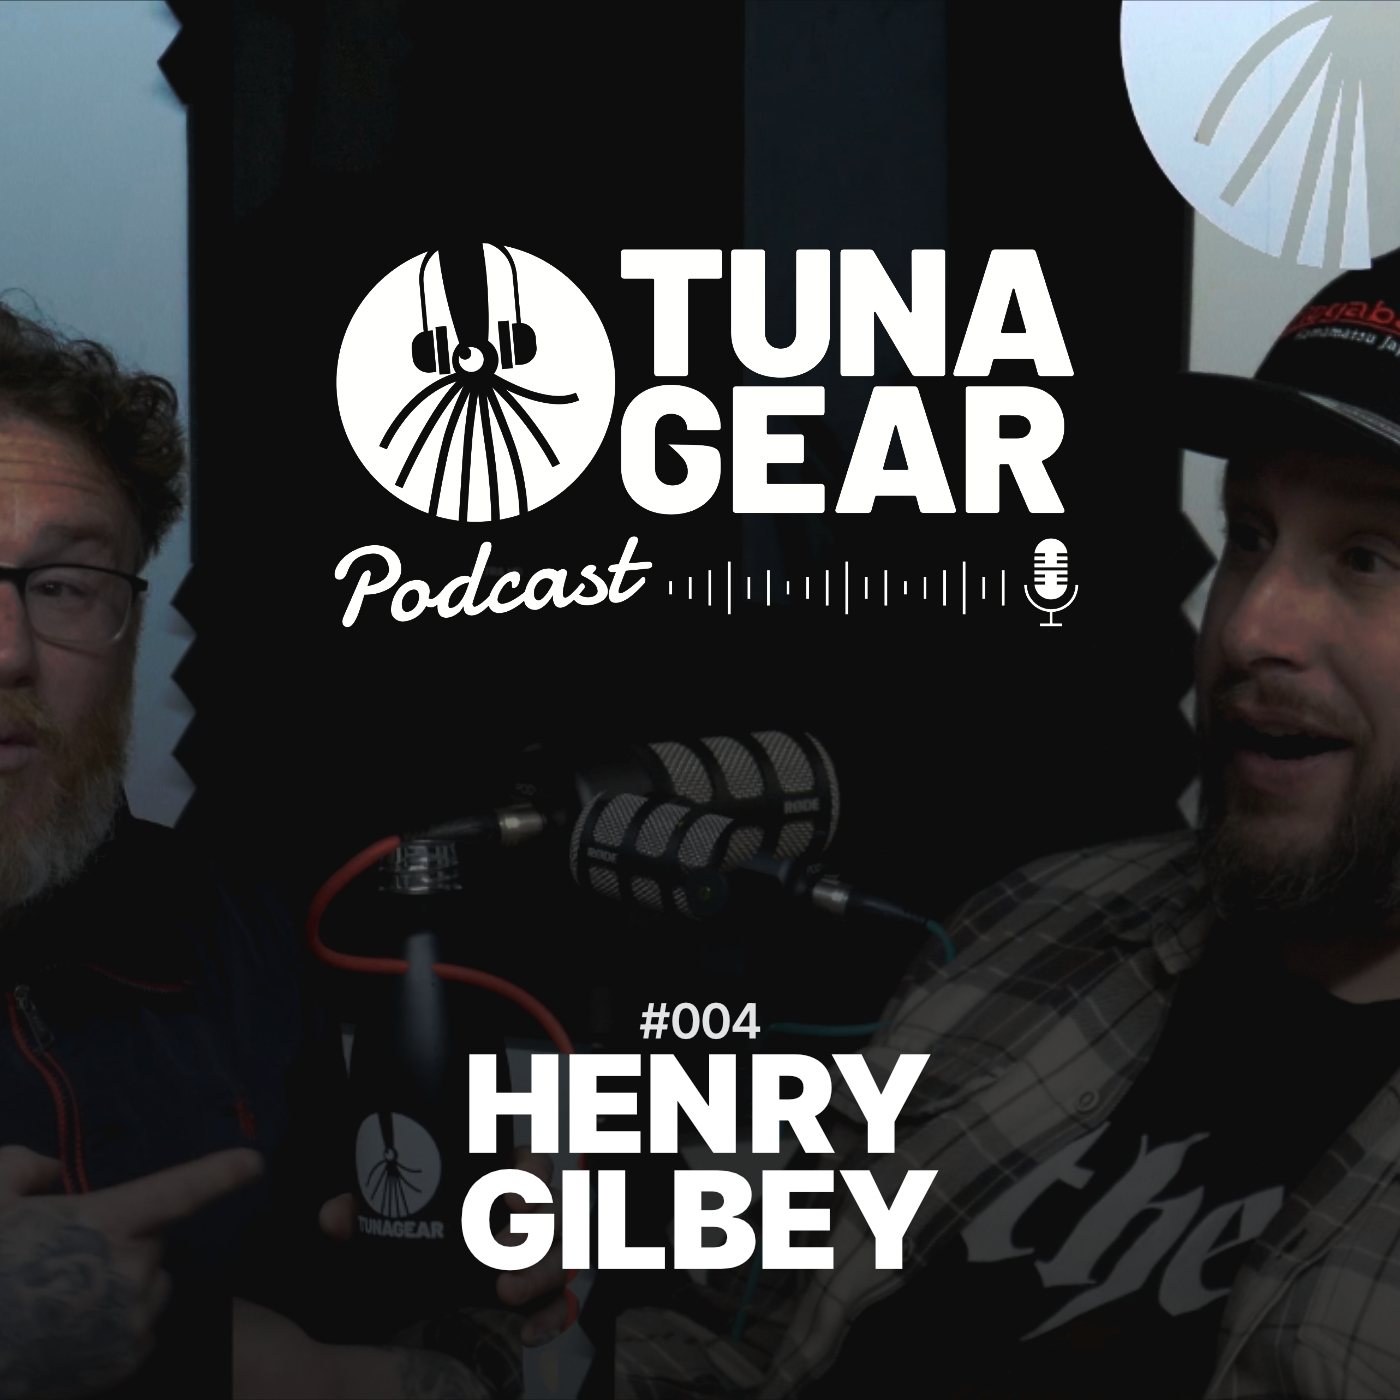 fishing podcast guest: henry gilbey